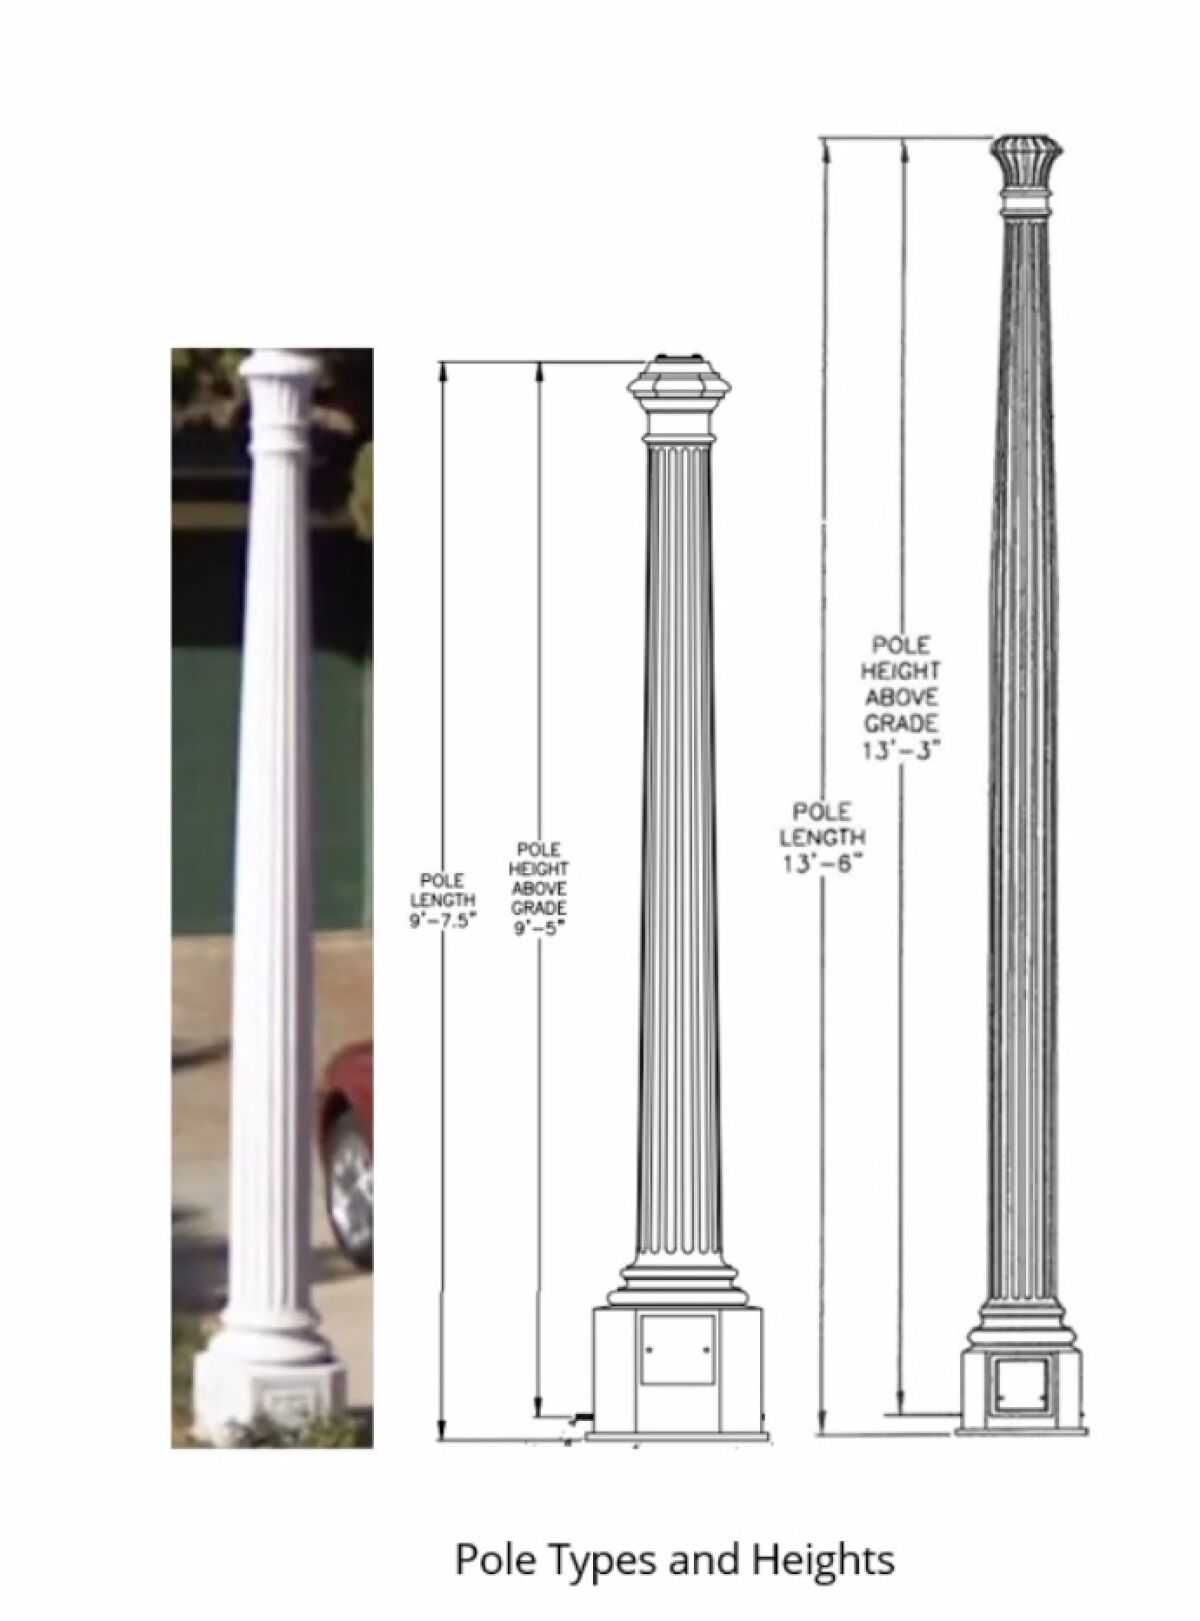 The poles can be either 9½ or 13½ feet tall and differ slightly in design details at the top and bottom.